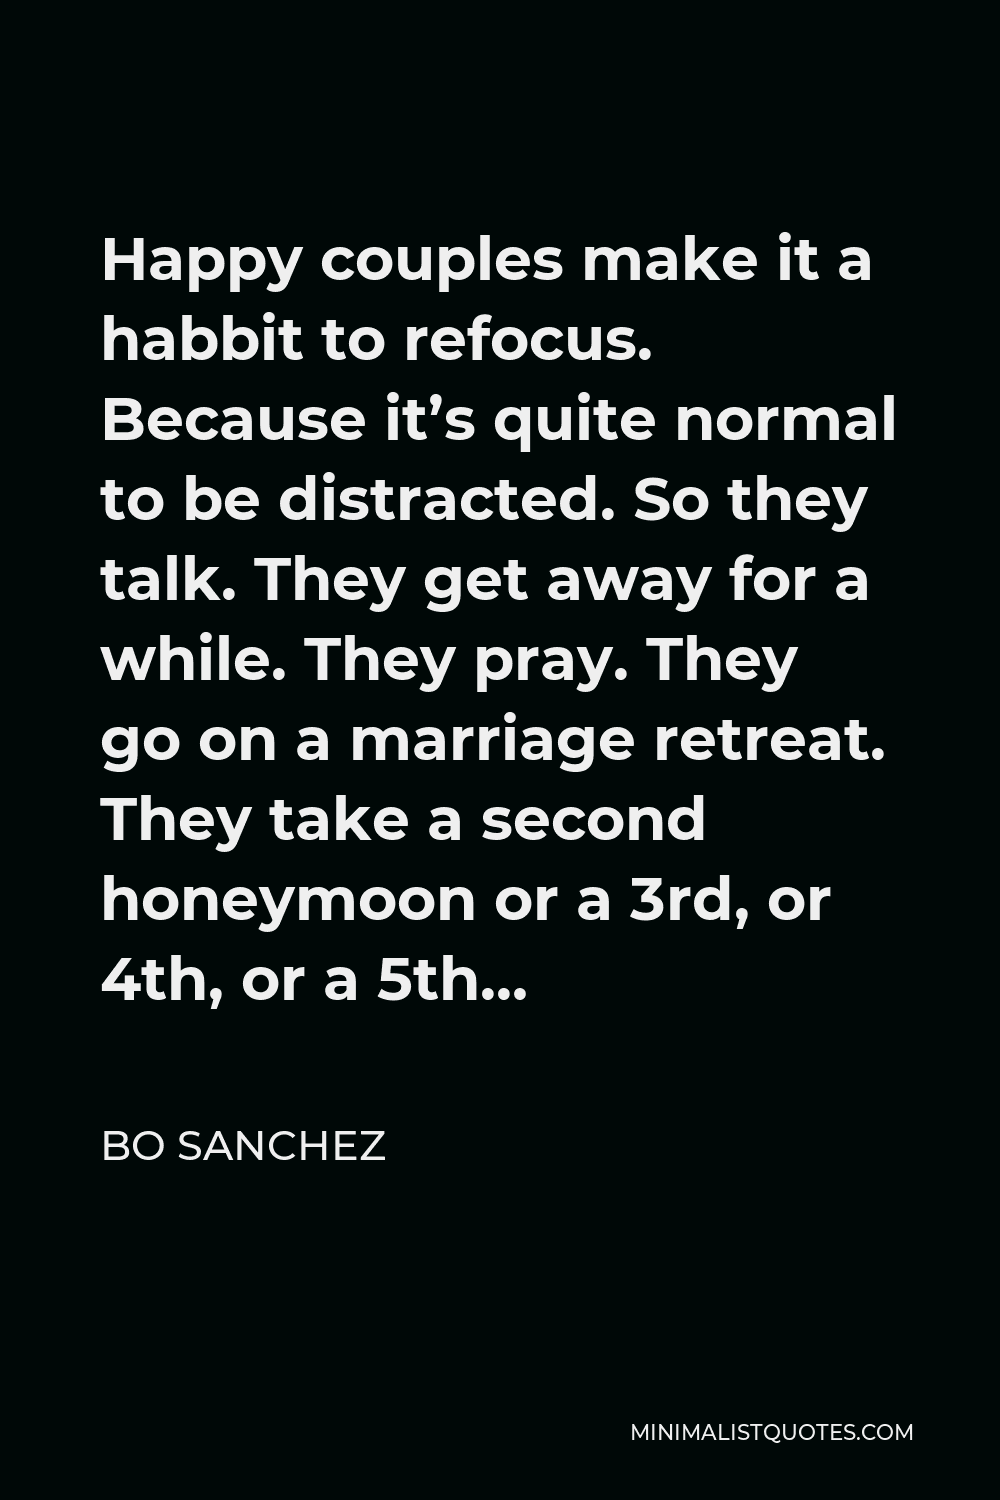 Bo Sanchez Quote - Happy couples make it a habbit to refocus. Because it’s quite normal to be distracted. So they talk. They get away for a while. They pray. They go on a marriage retreat. They take a second honeymoon or a 3rd, or 4th, or a 5th…